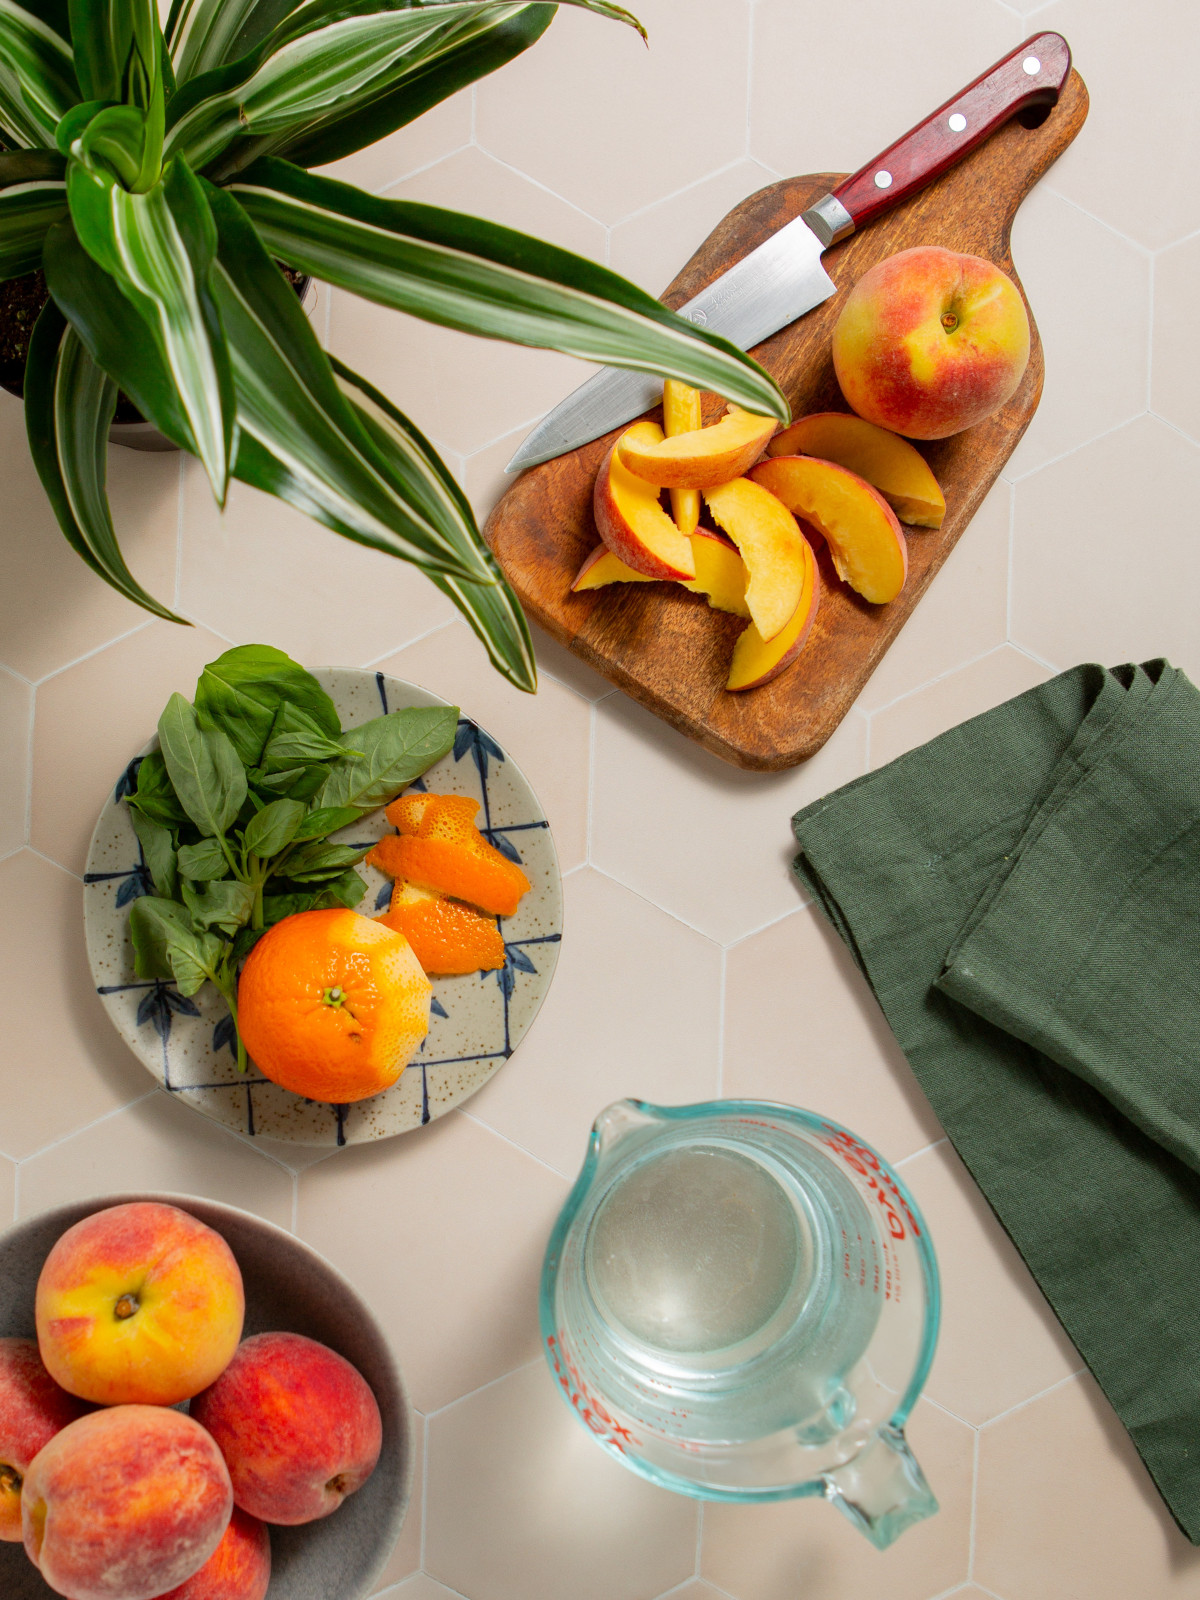 Ingredients laid out on a countertop for making peach infused water with basil.